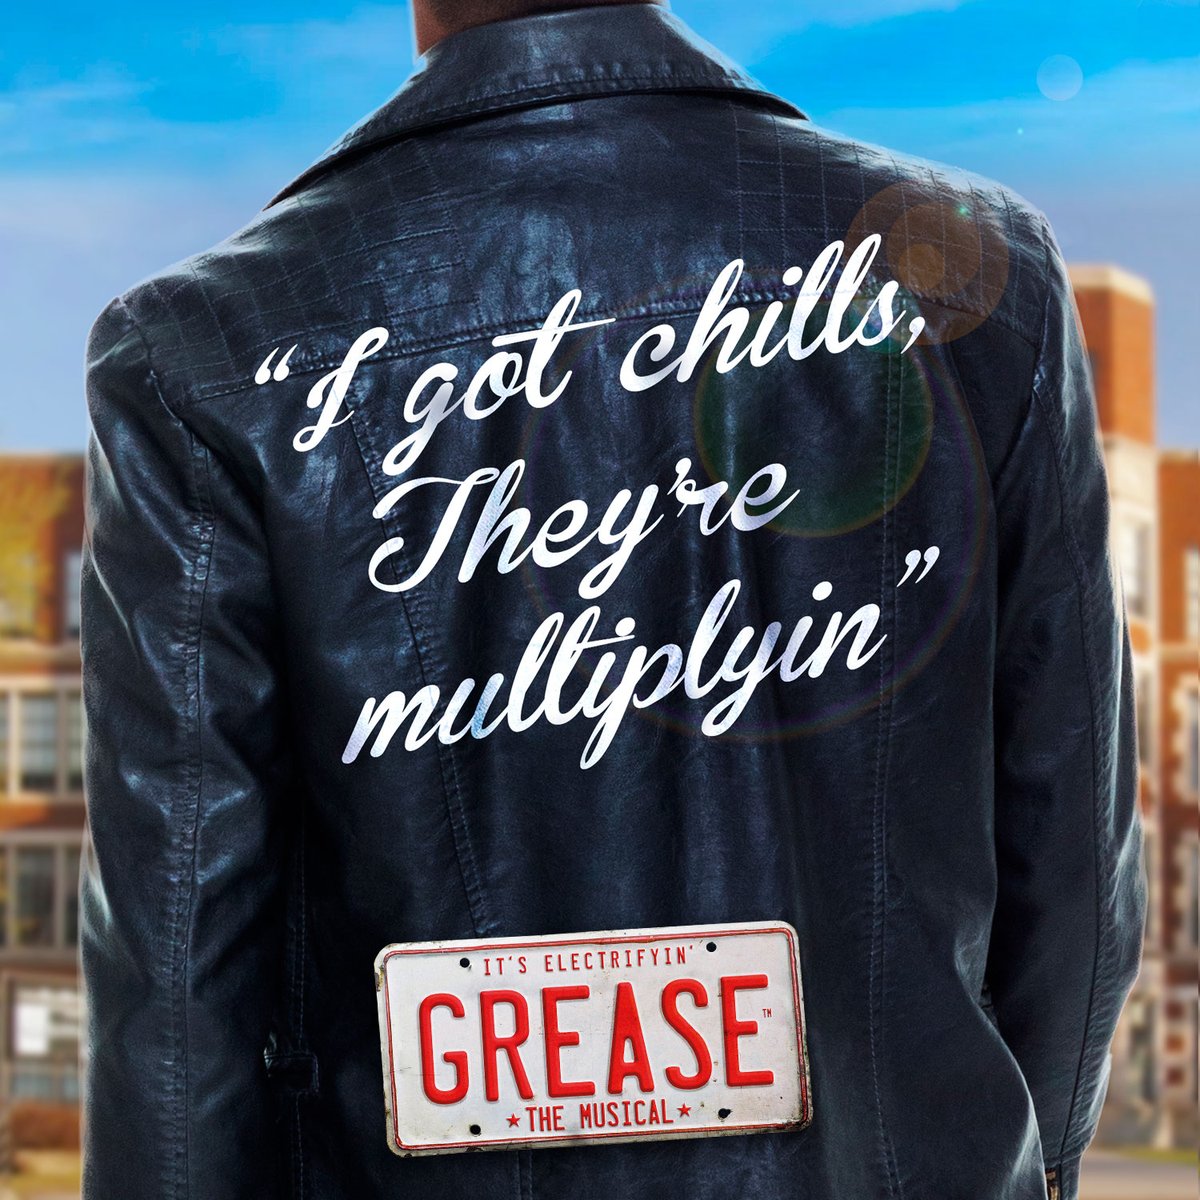 In 3 months time, you'll get chills, they'll be multiplying... @Grease_UK arrives in Milton Keynes this August in a thrilling new production of an iconic story (featuring these equally iconic jackets) 🤩 Buy your tickets now! 📅 Mon 5 - Sat 10 Aug 🎟️ atgtix.co/49PCvR0